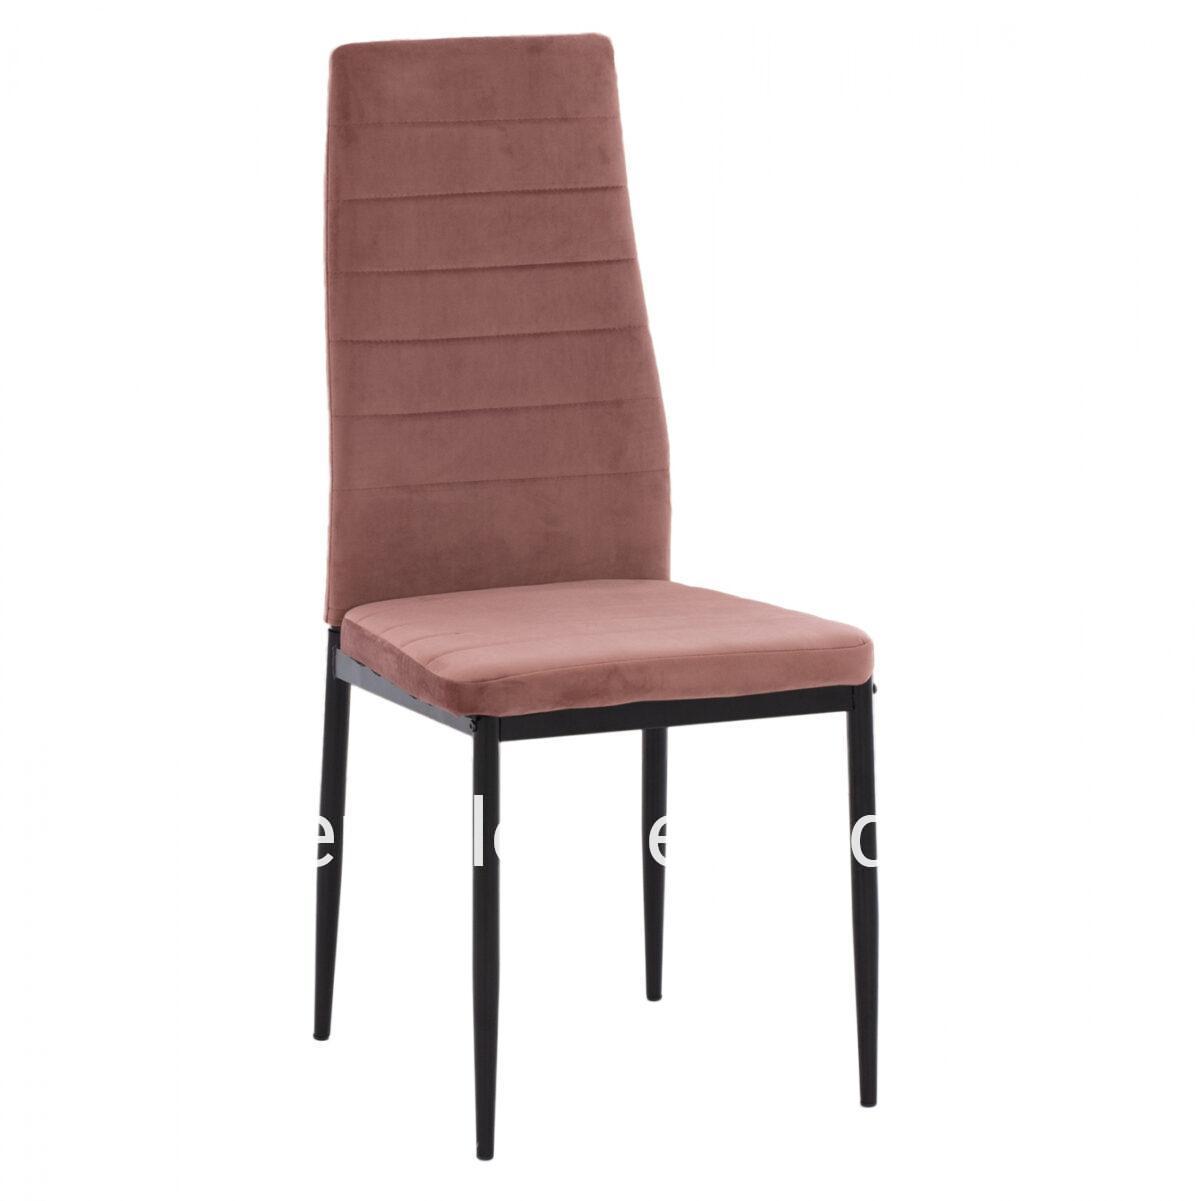 METAL CHAIR HM0037.32 DUSTY PINK VELVET WITH METAL FRAME K/D